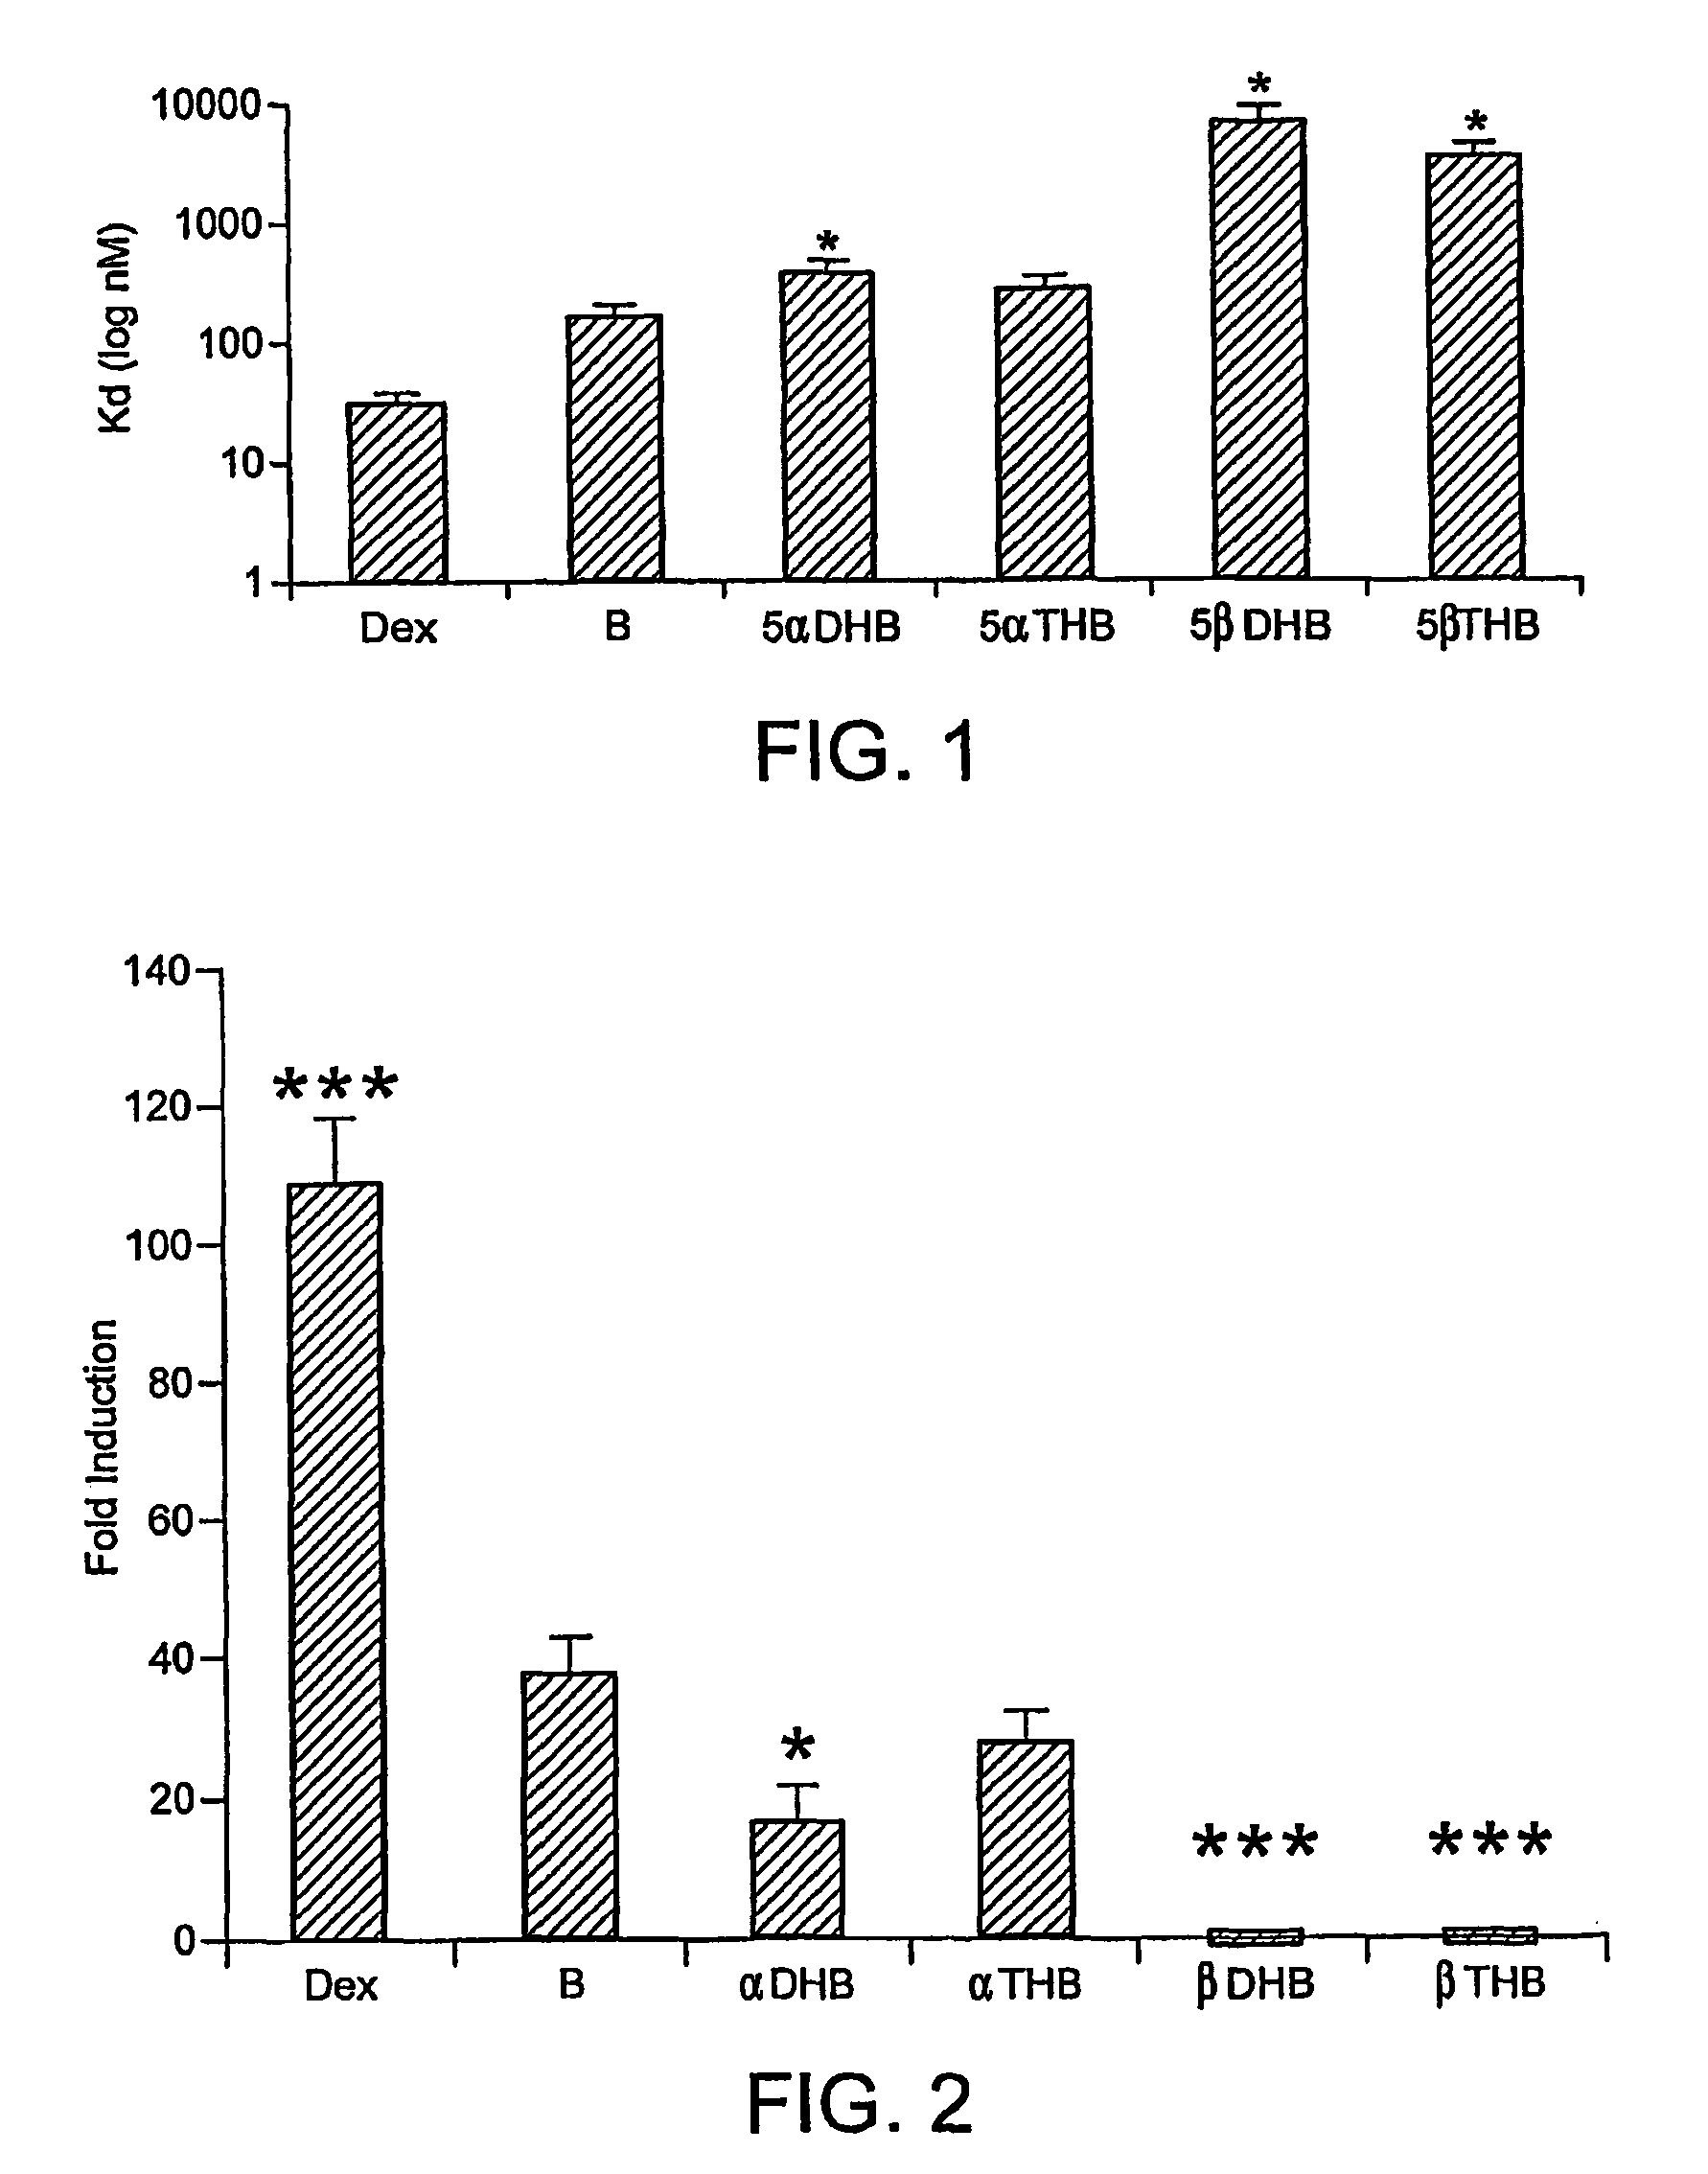 Treatment of inflammation with 5α reduced metabolites